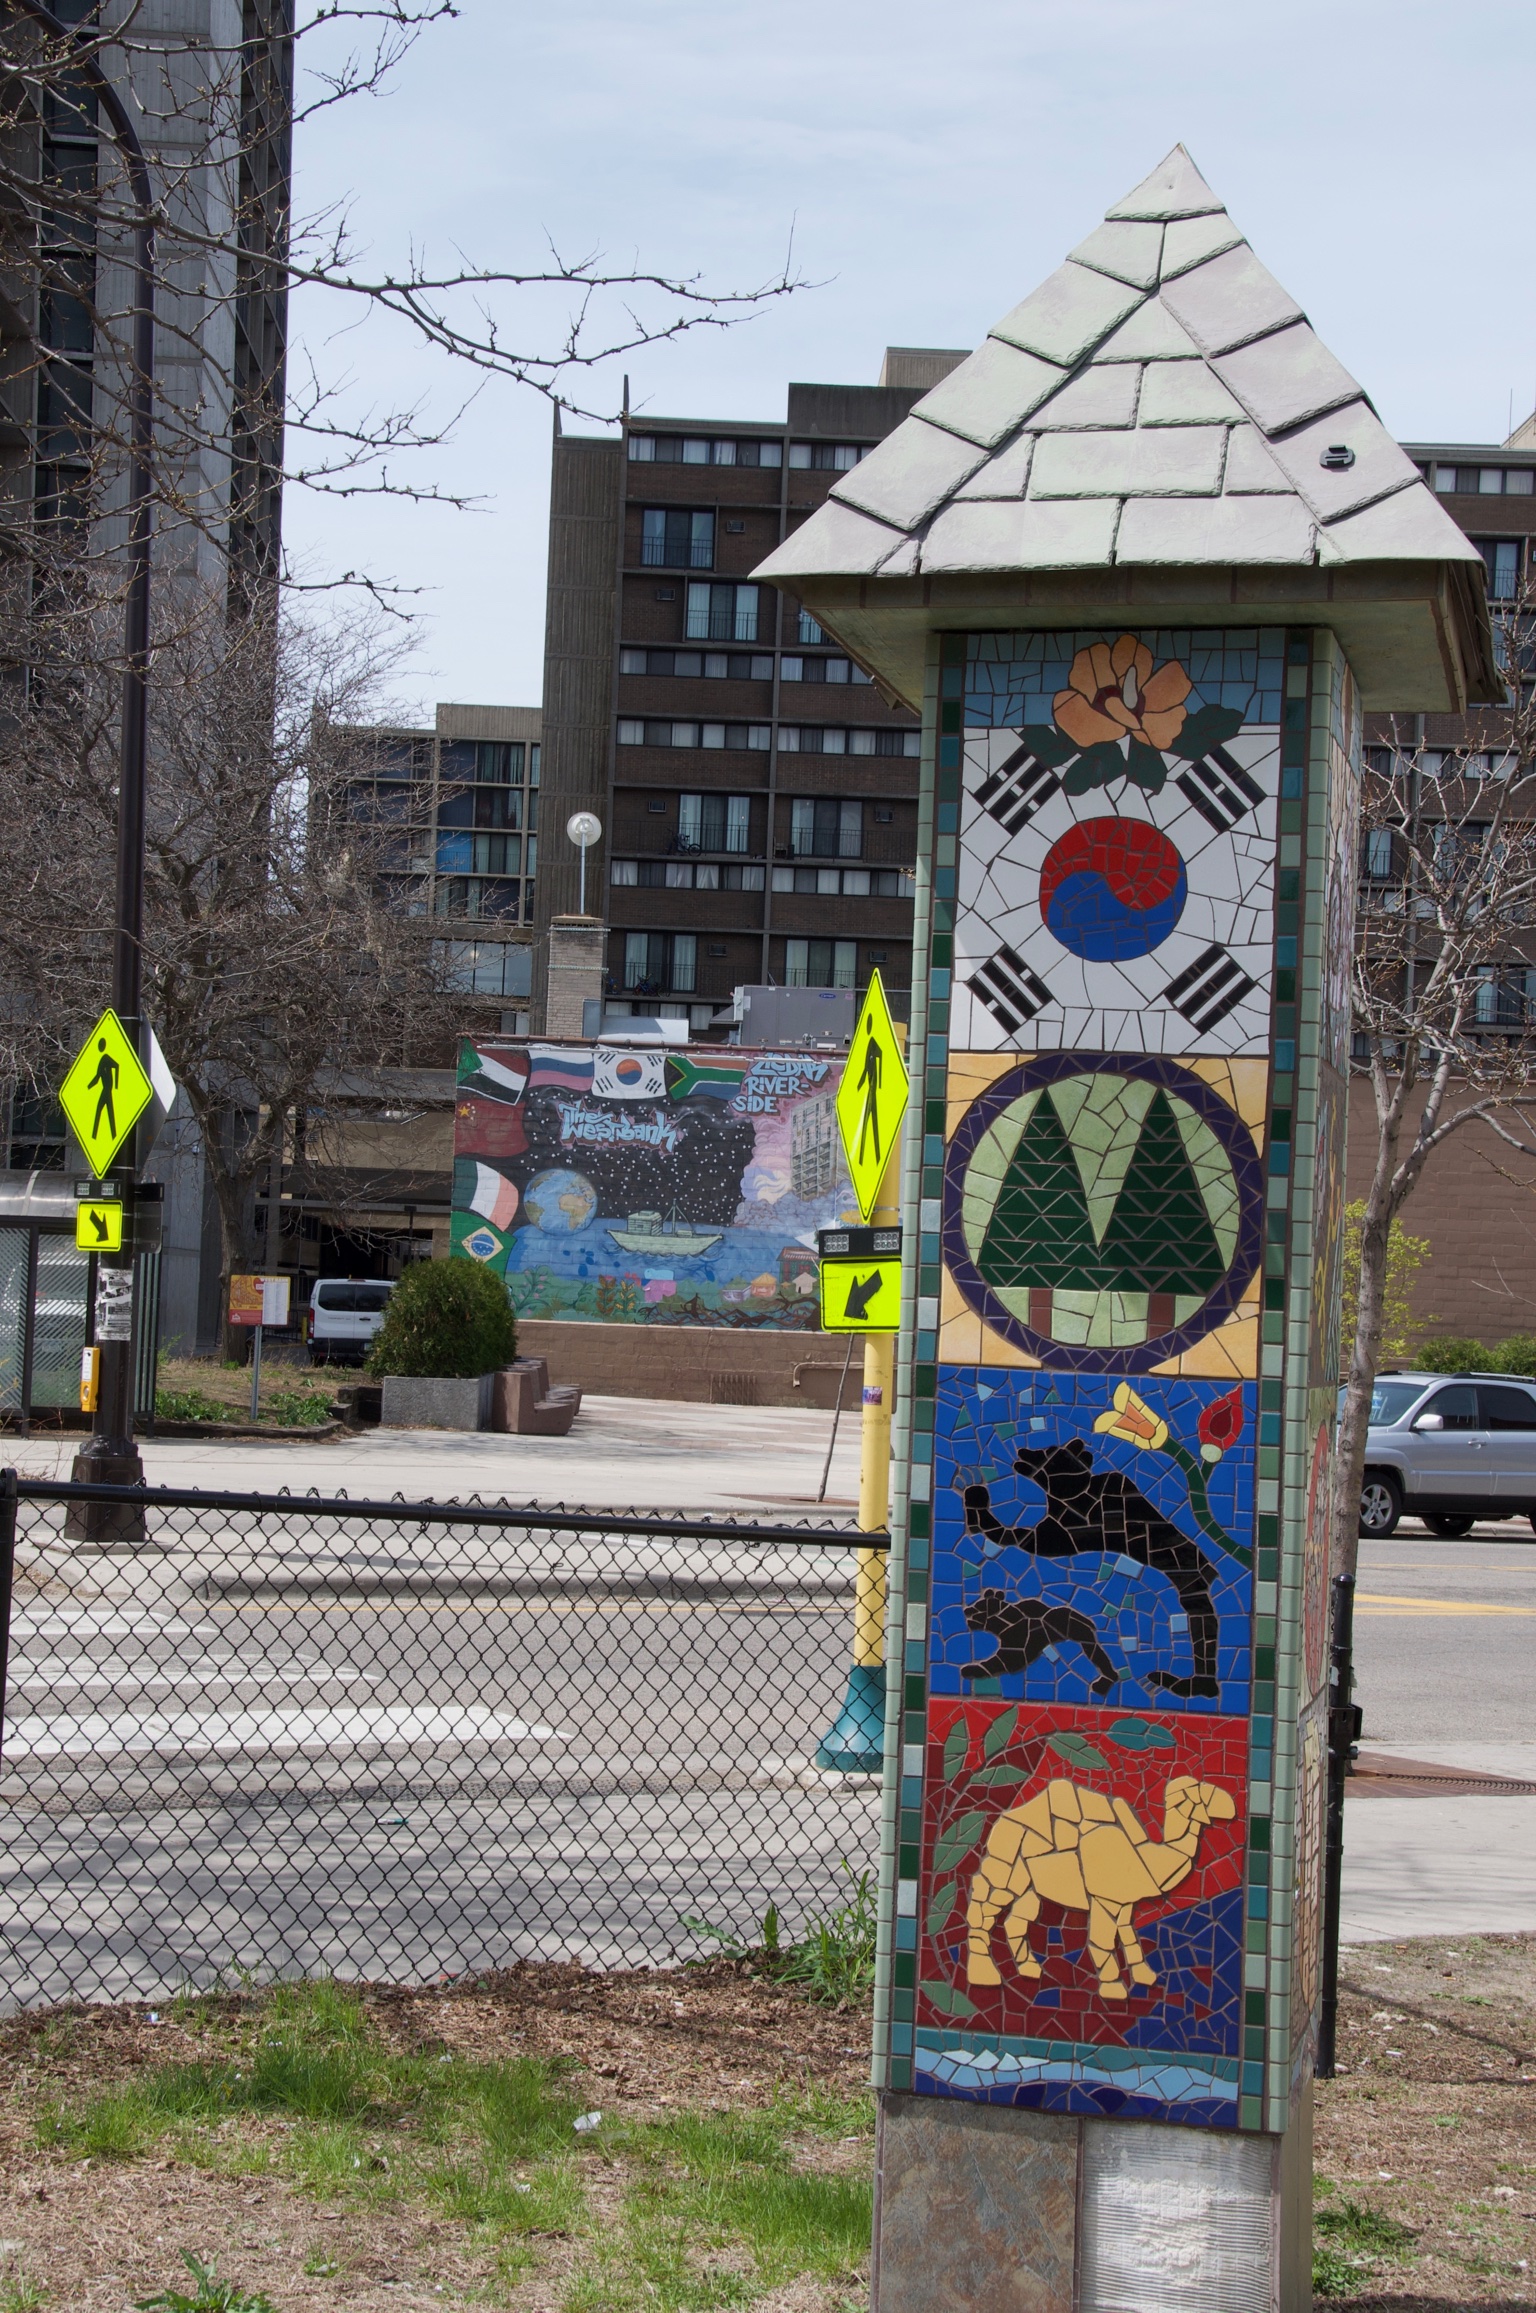 The mosaic signpost features images from varied cultures and environments